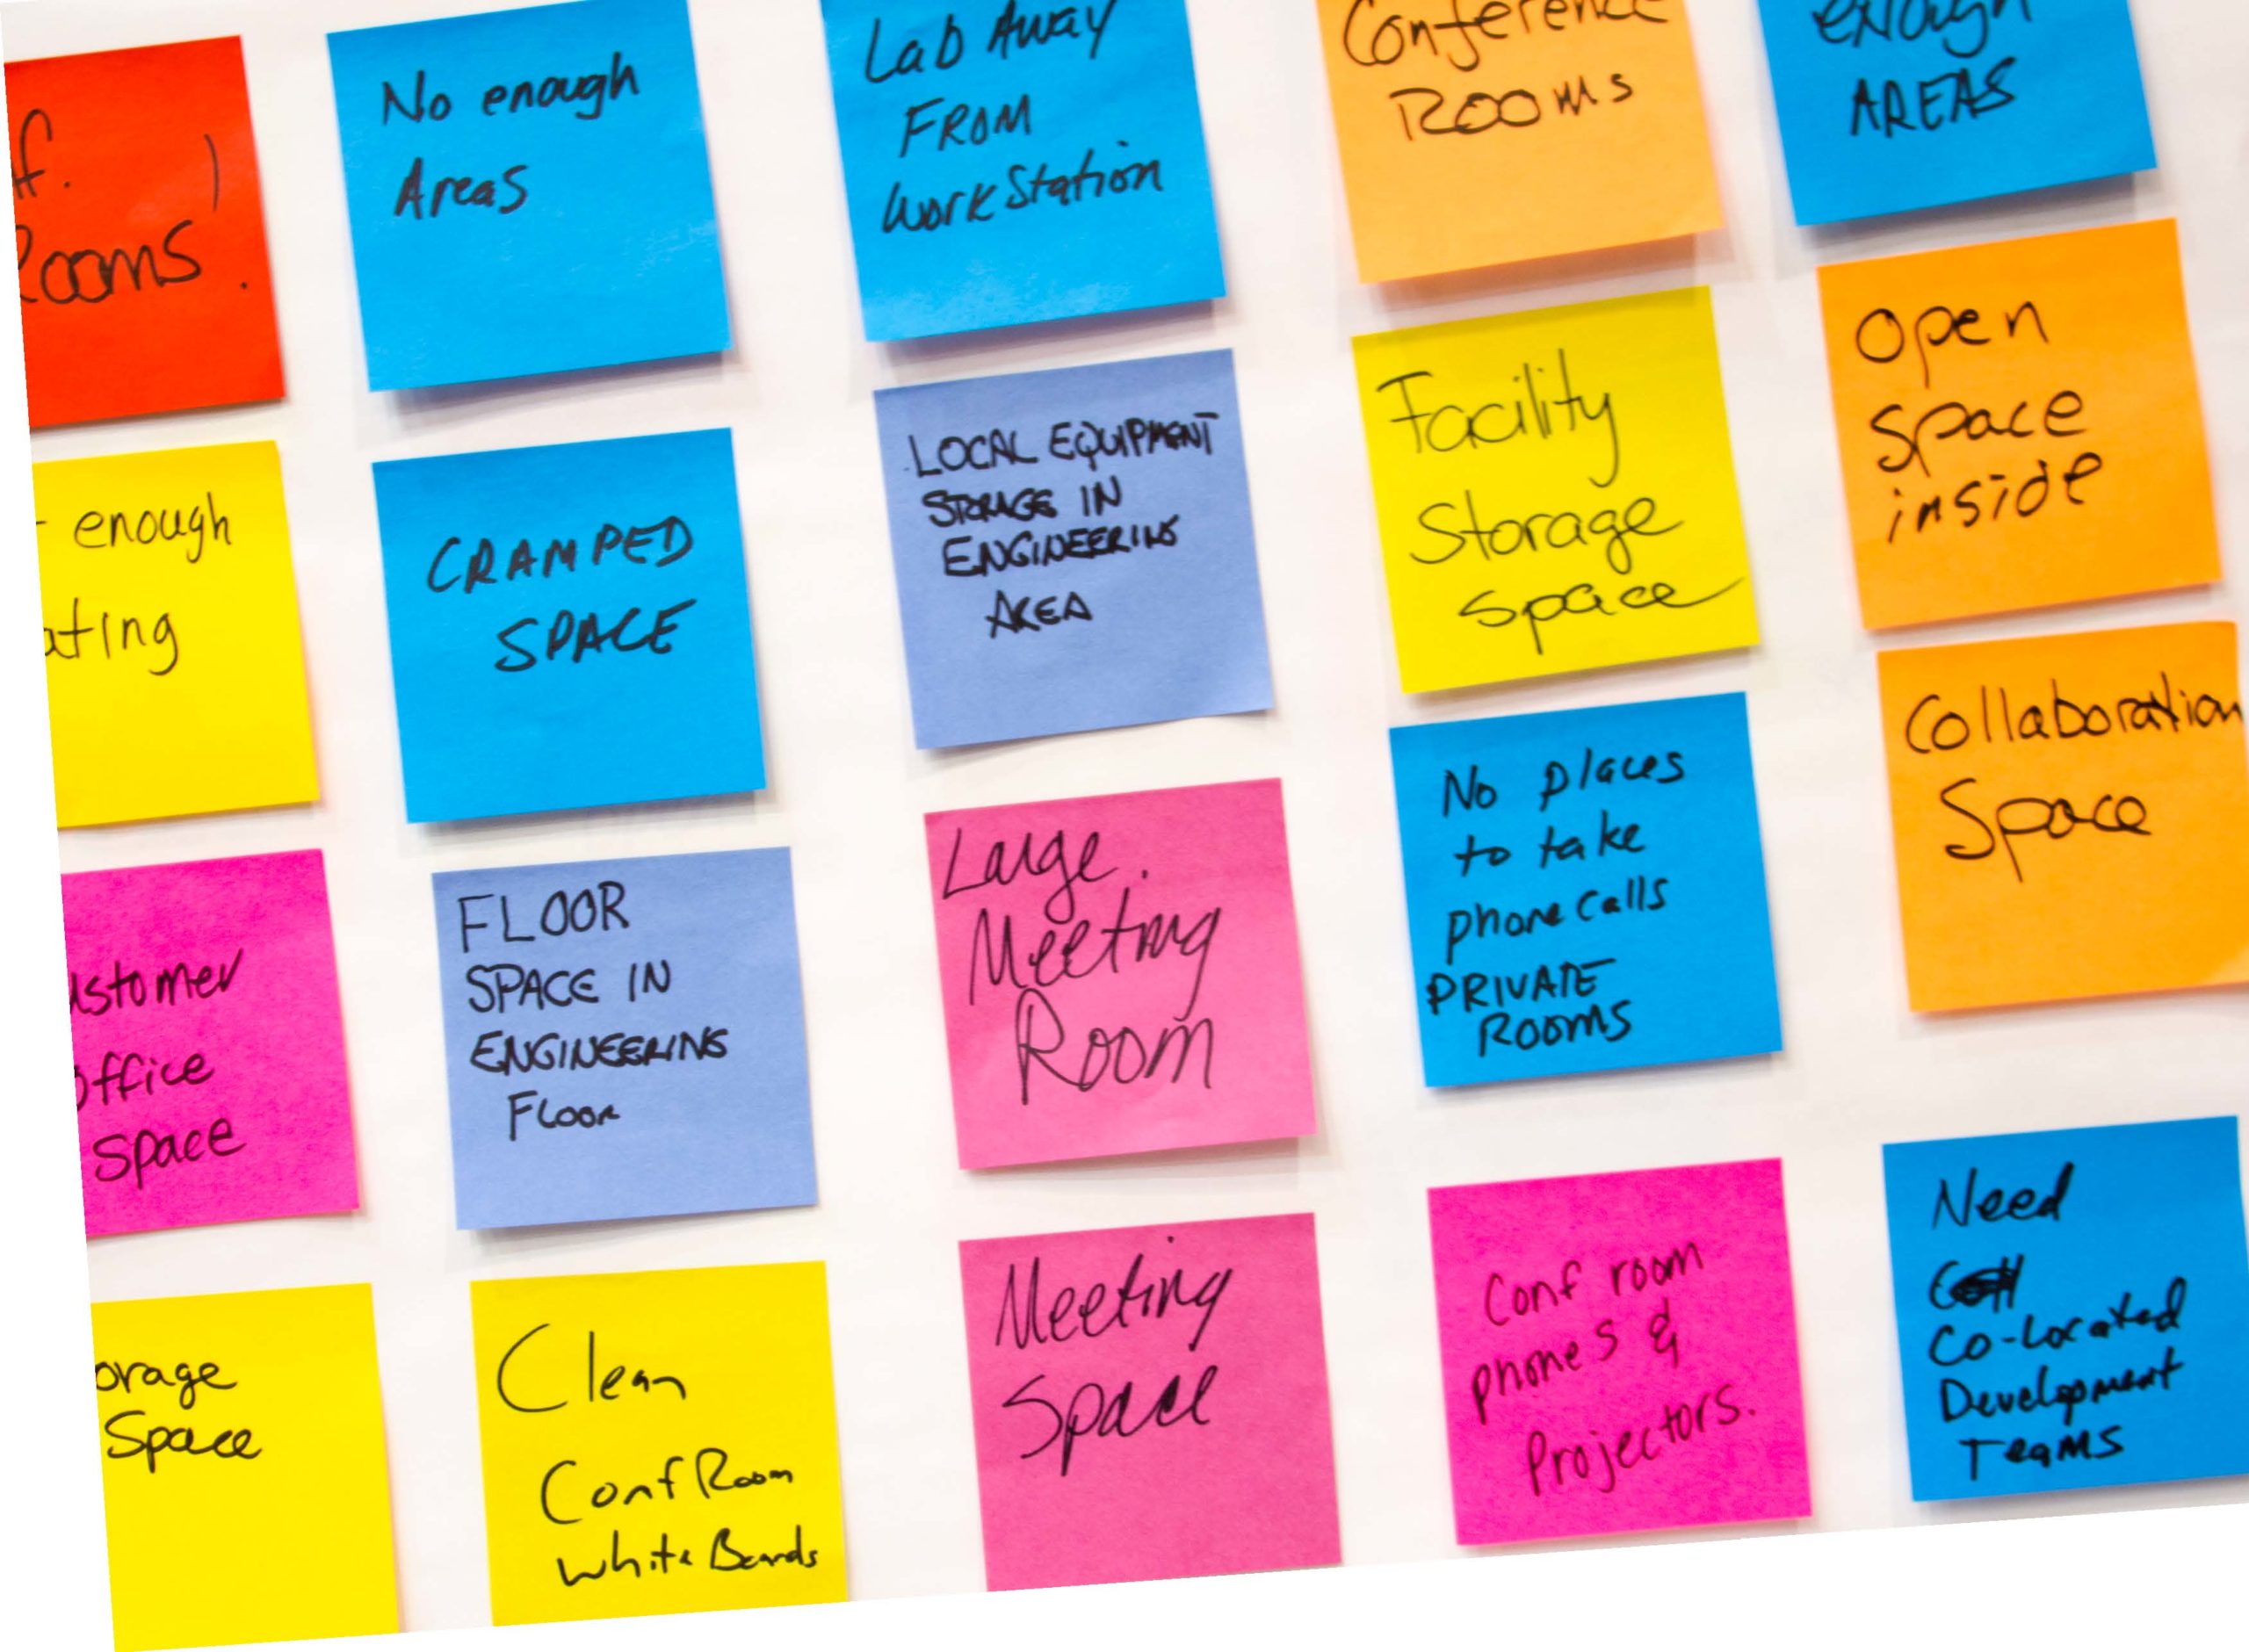 Multi-colored post-its with notes